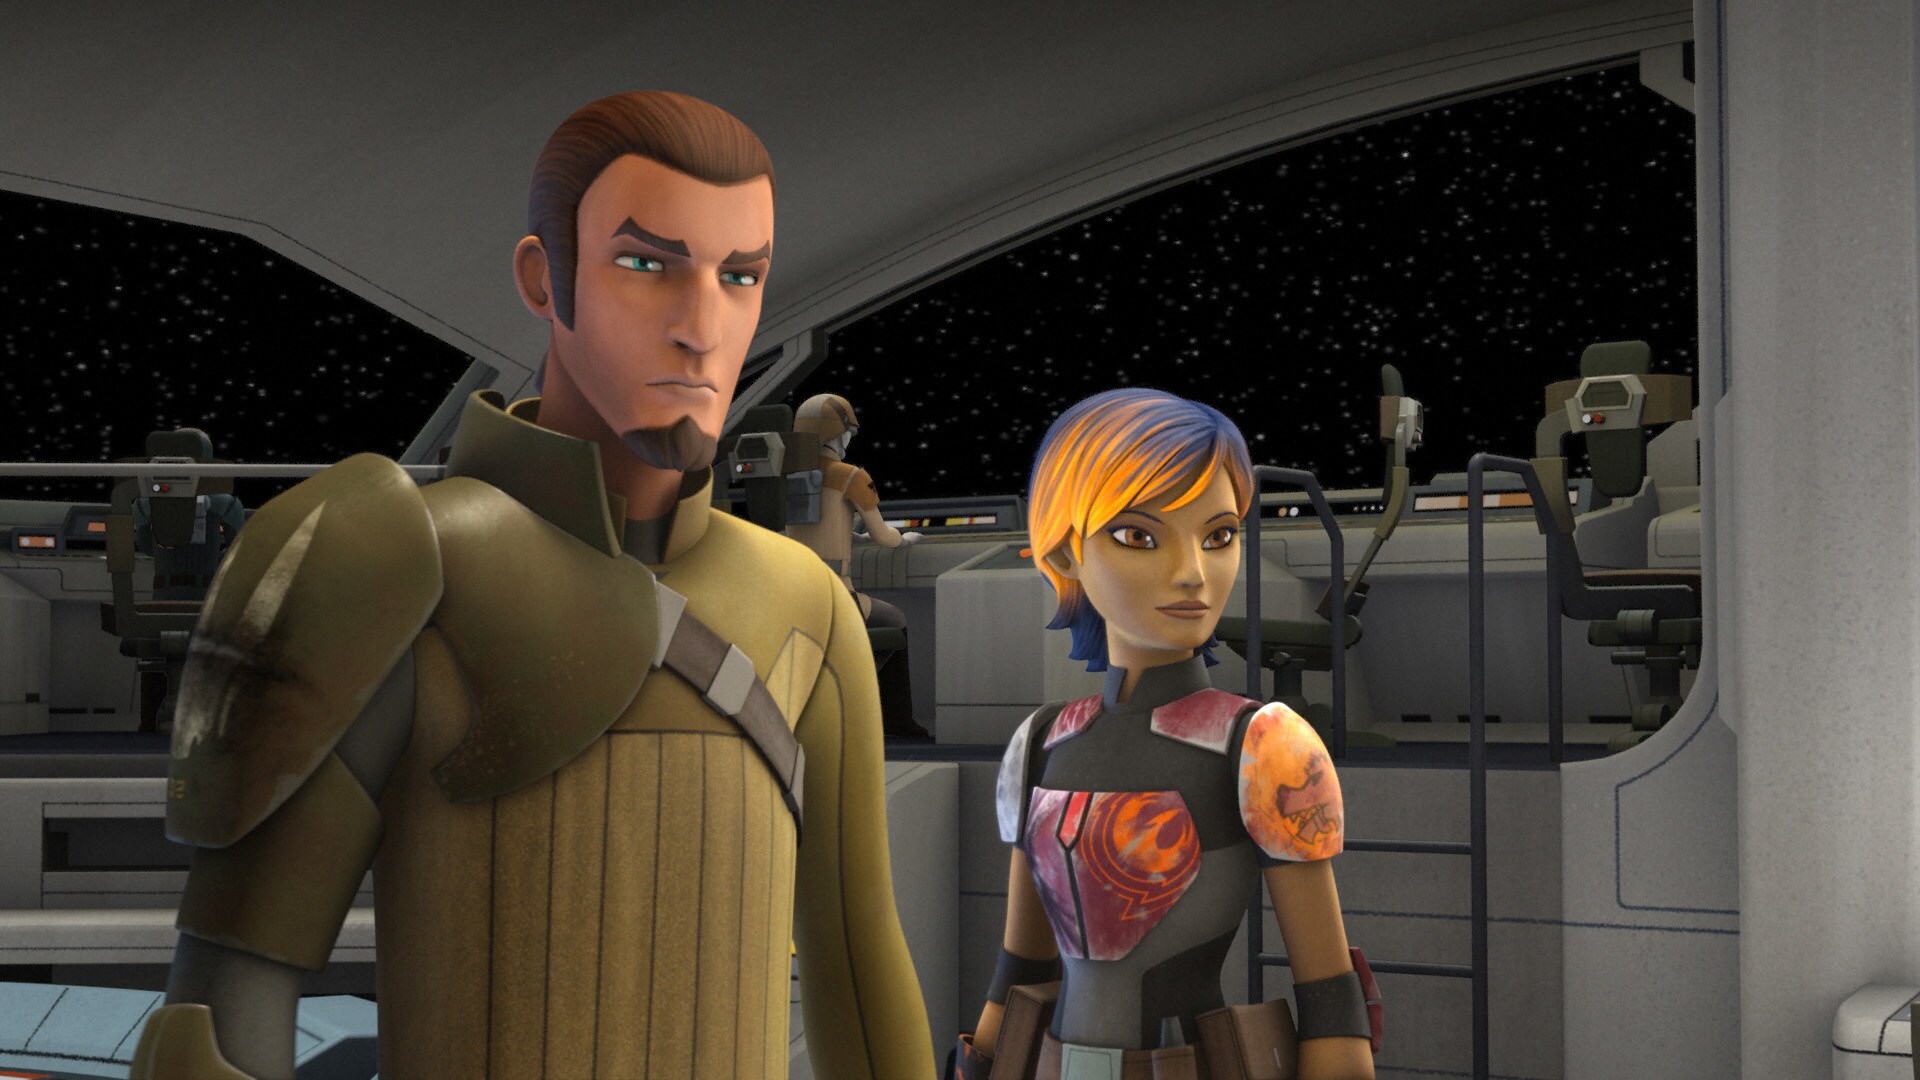 The burn mark that Kanan sustains on his shoulder armor is now part of his Season 2 design.